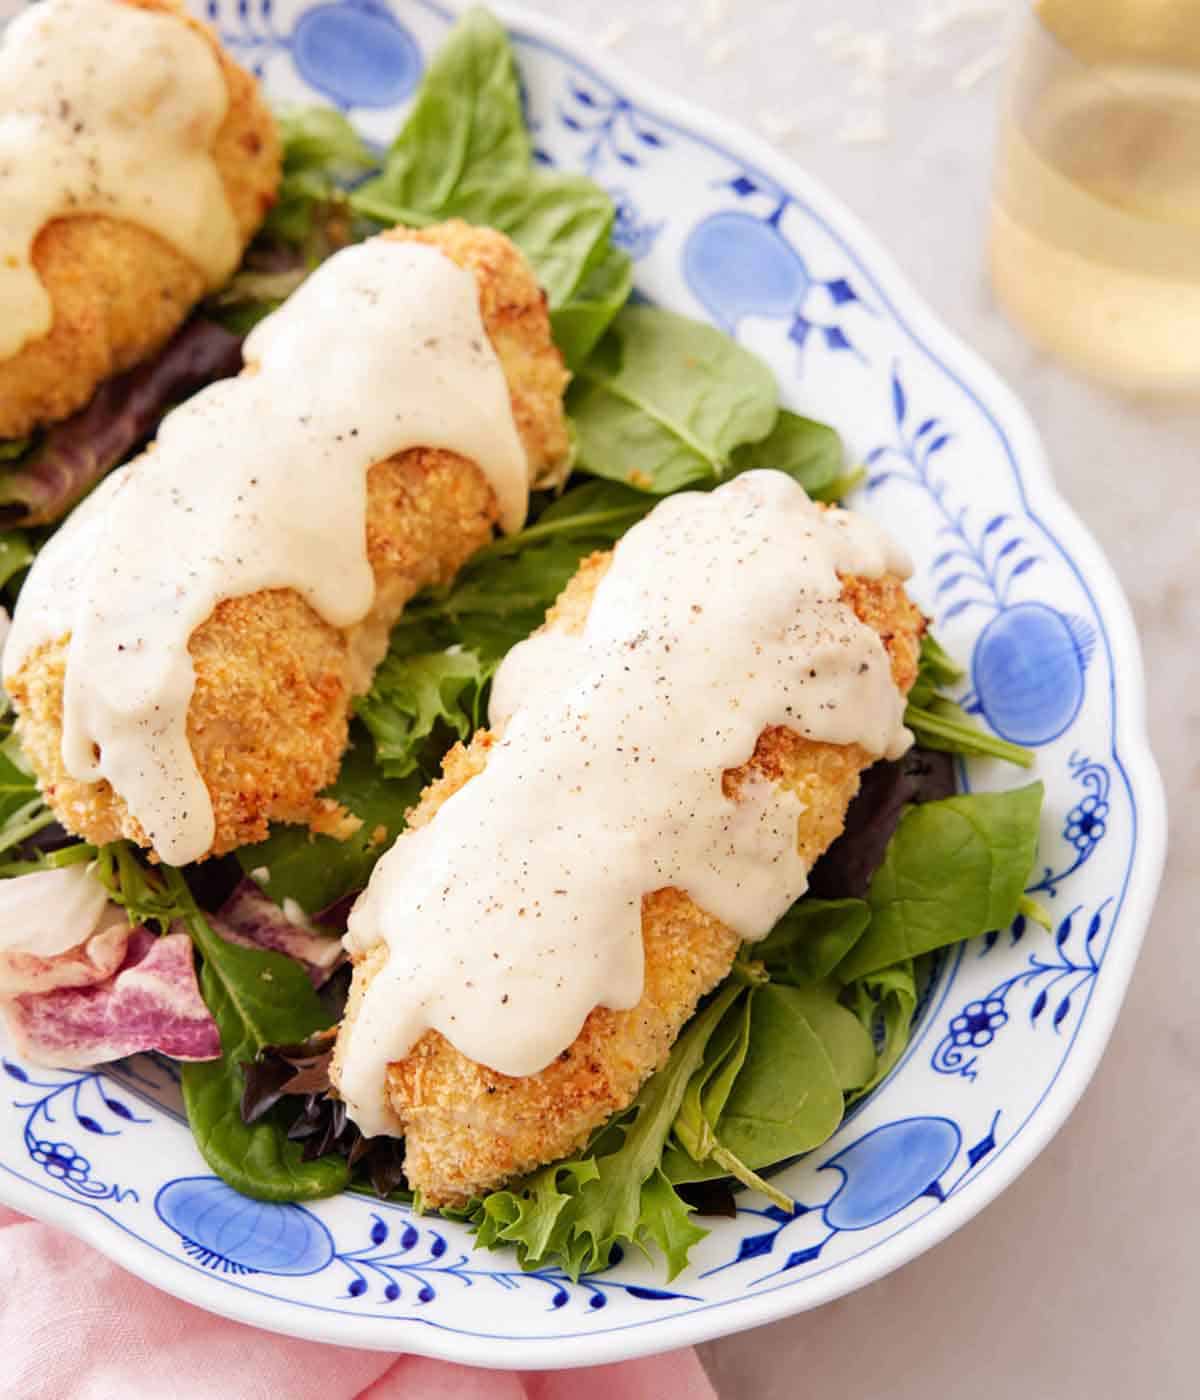 Overhead view of a platter with chicken cordon bleu with sauce on top, over salad.